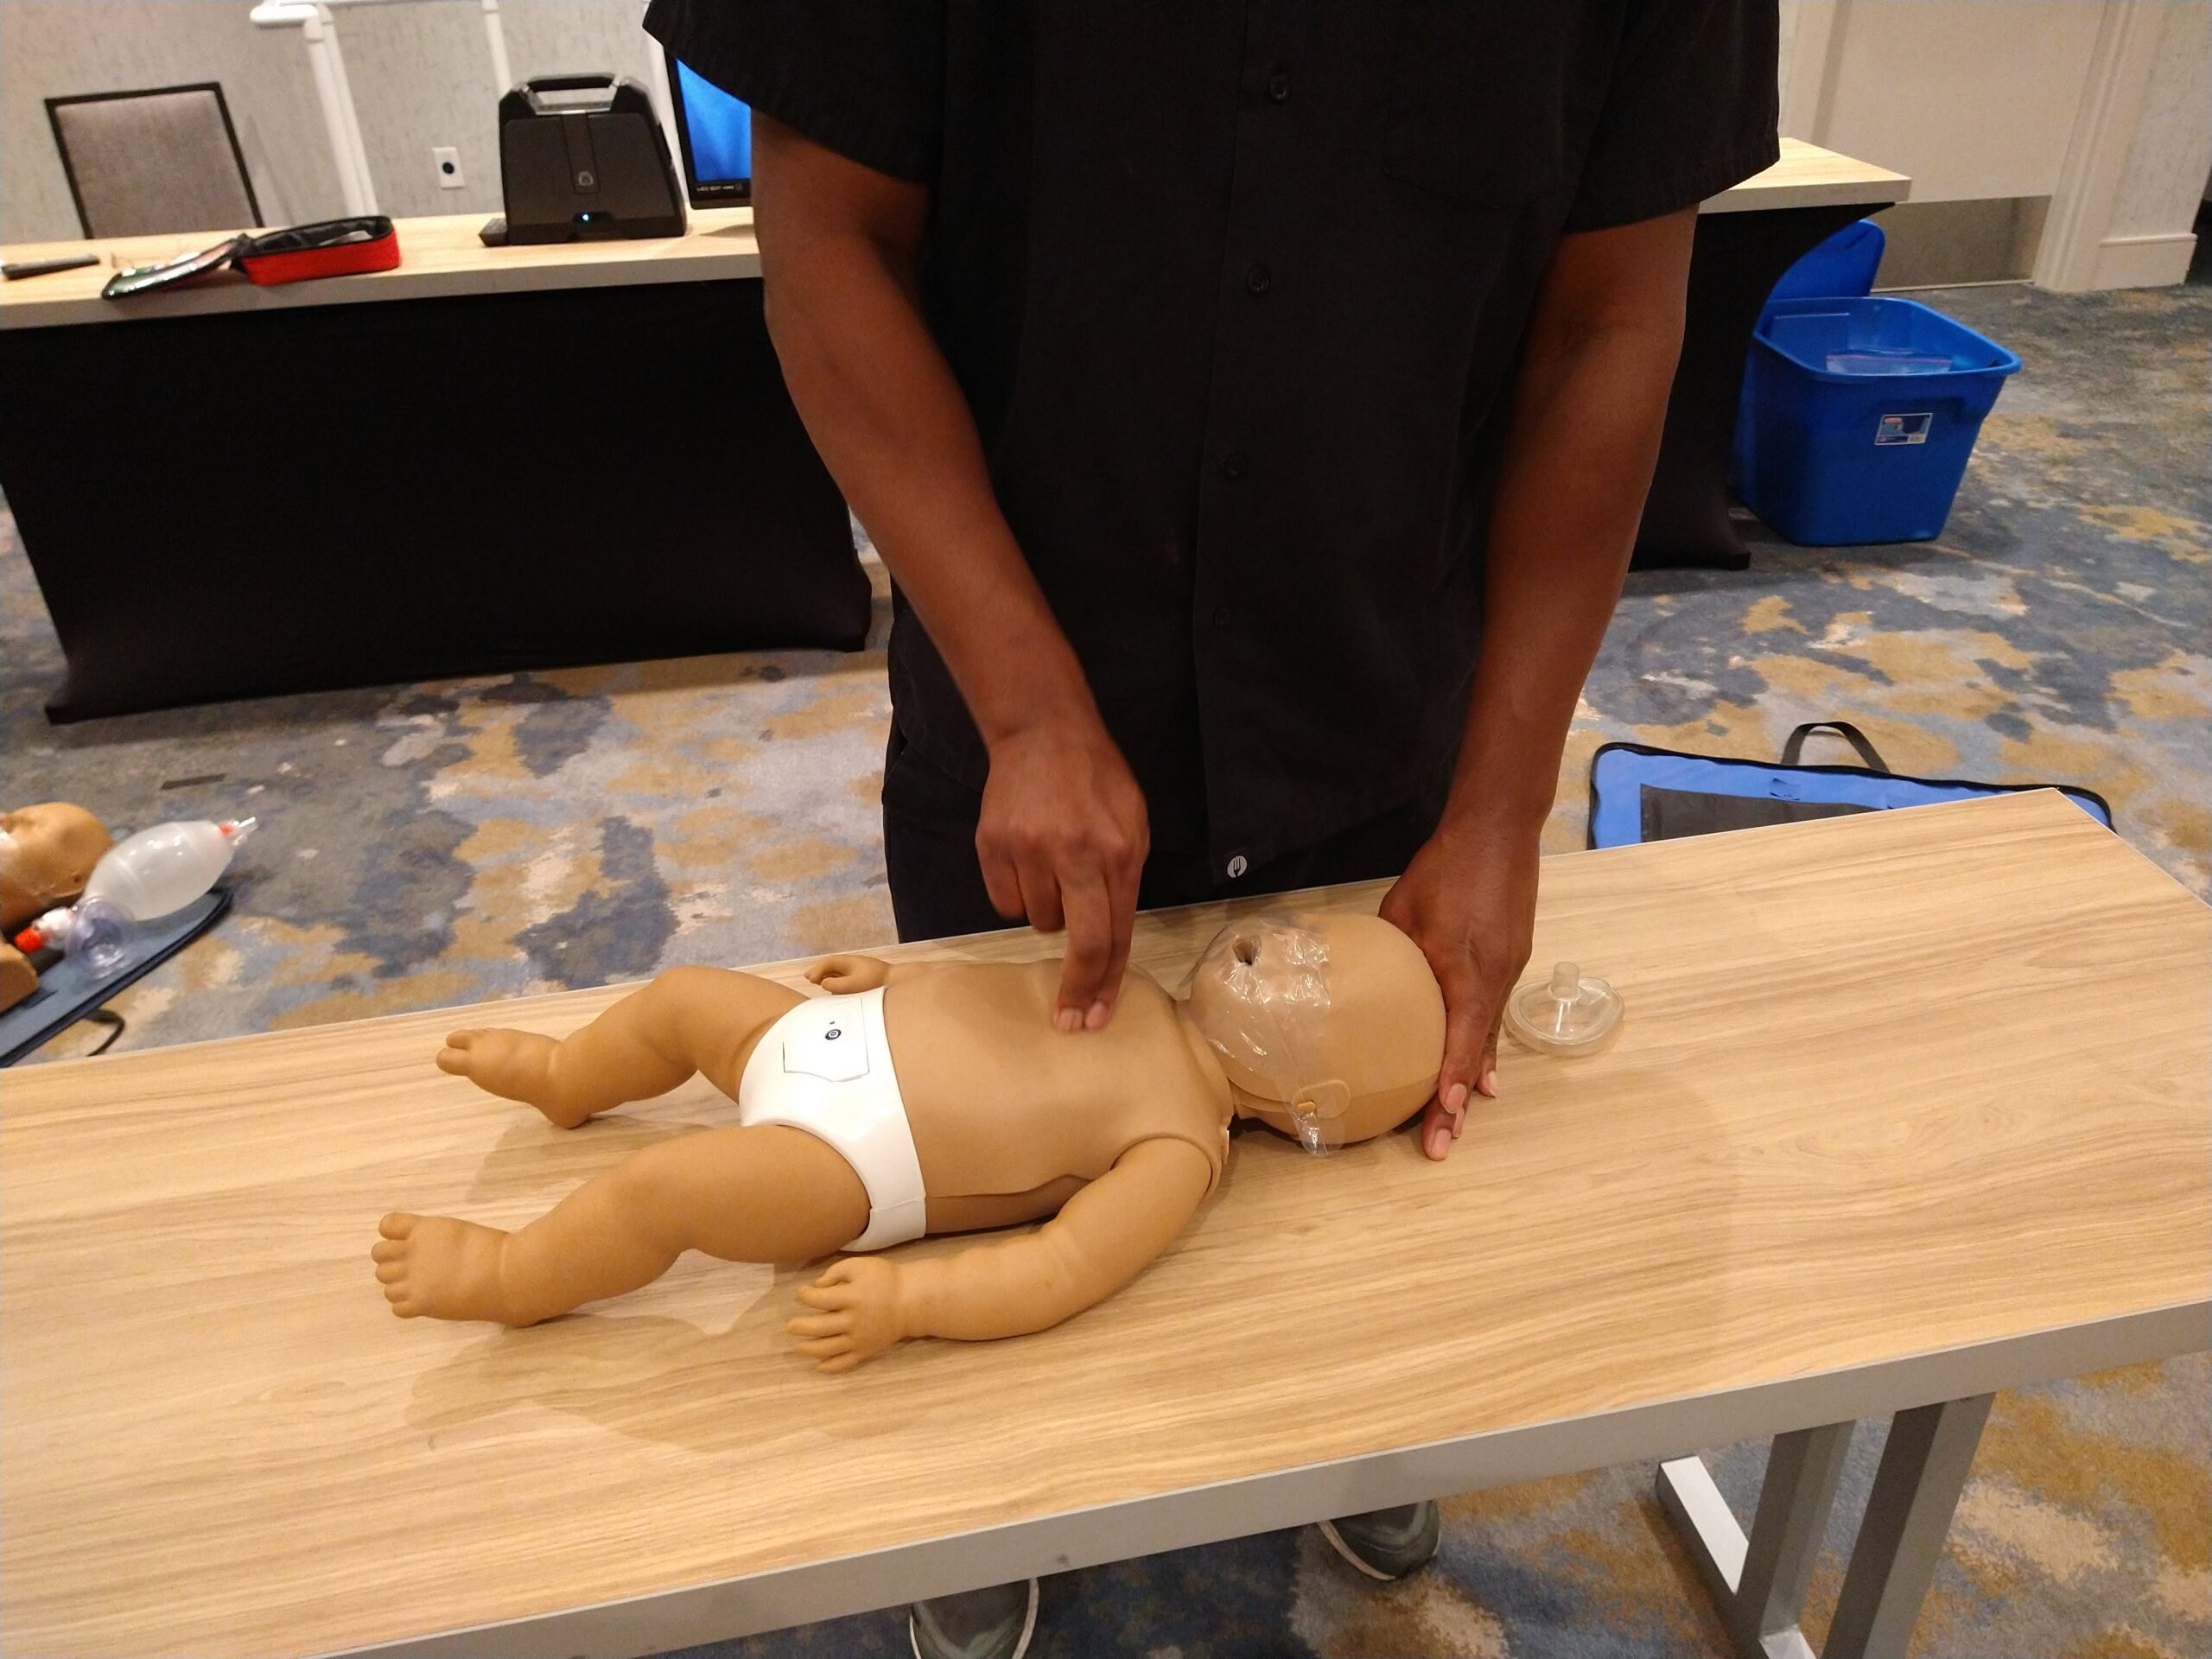 how-much-is-a-bls-class-at-american-heart-association-cpr-classes-augusta-ga-cpr-classes